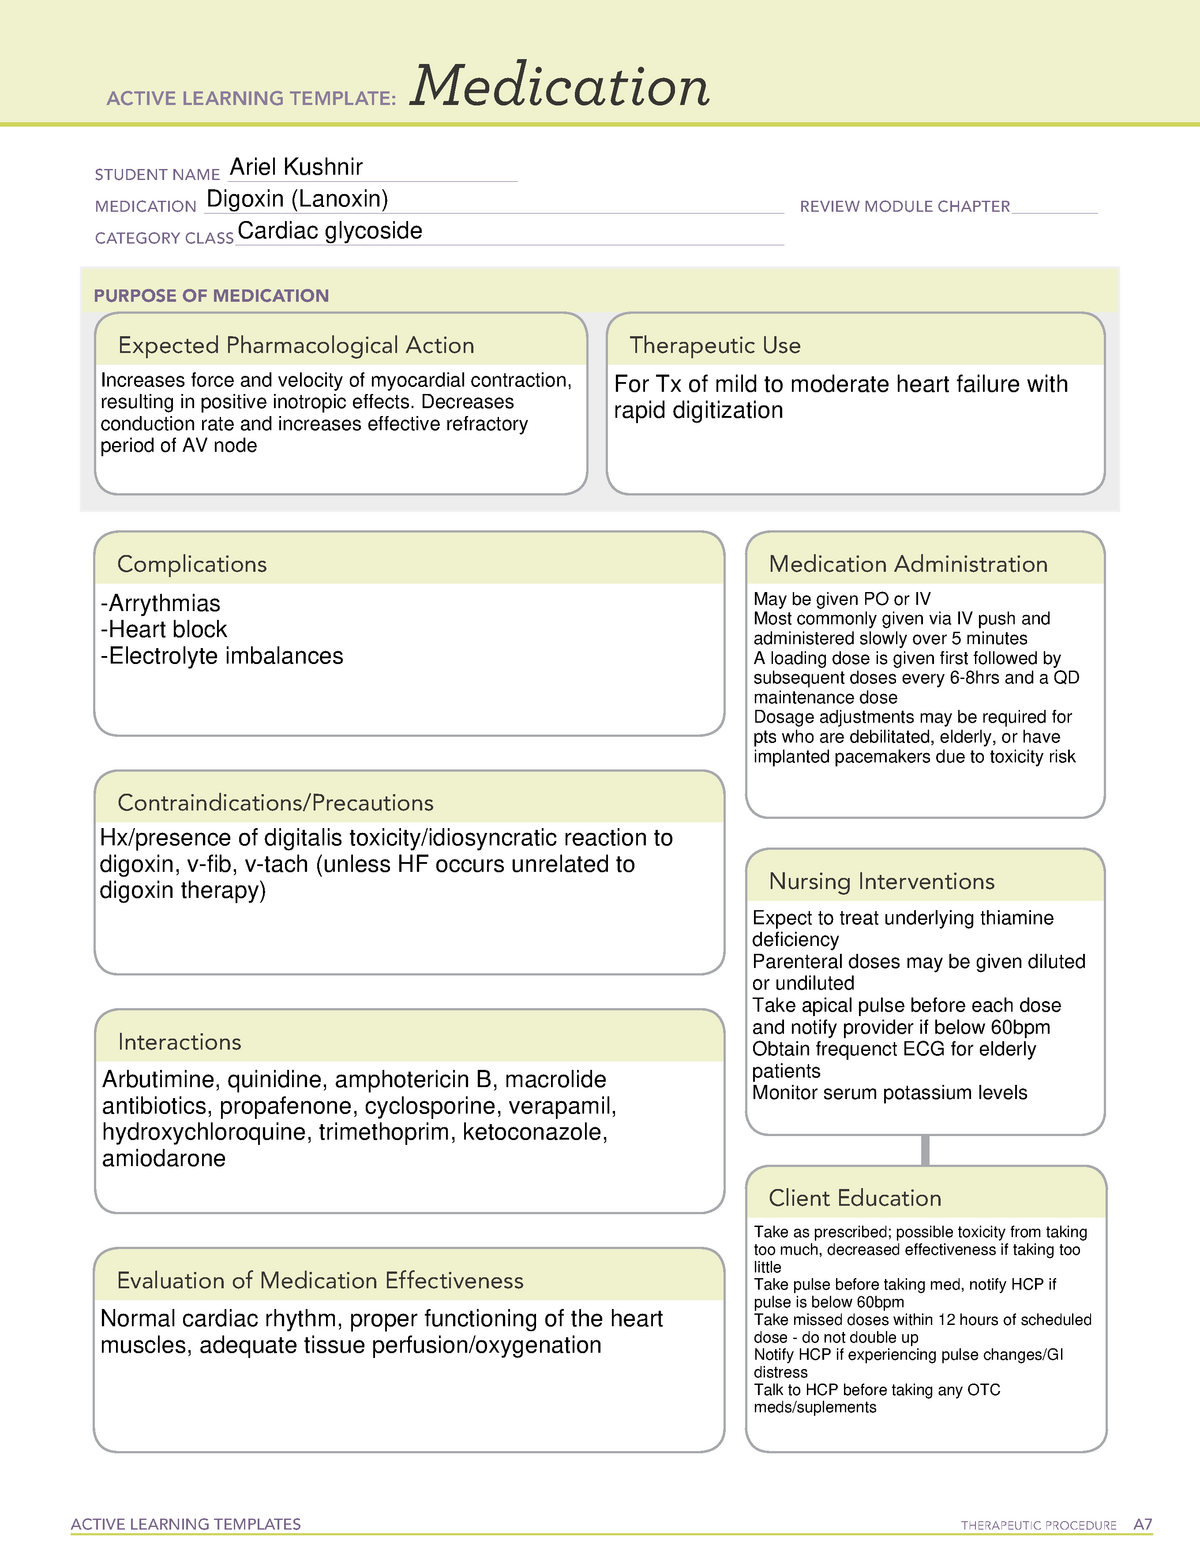 Digoxin med sheet ACTIVE LEARNING TEMPLATES THERAPEUTIC PROCEDURE A